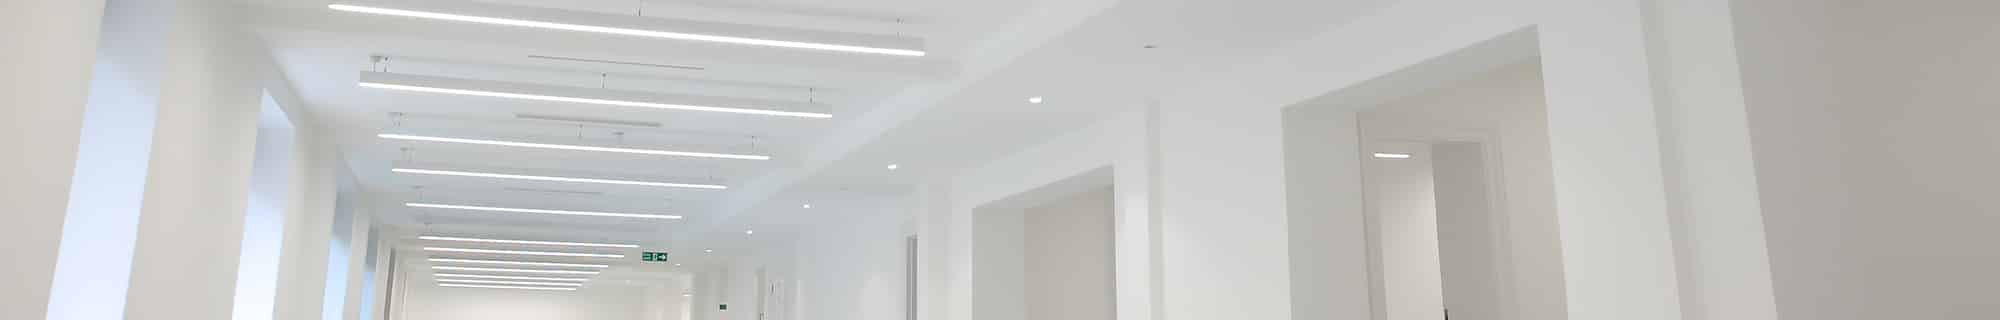 M-Line Suspended Linear Lighting in white